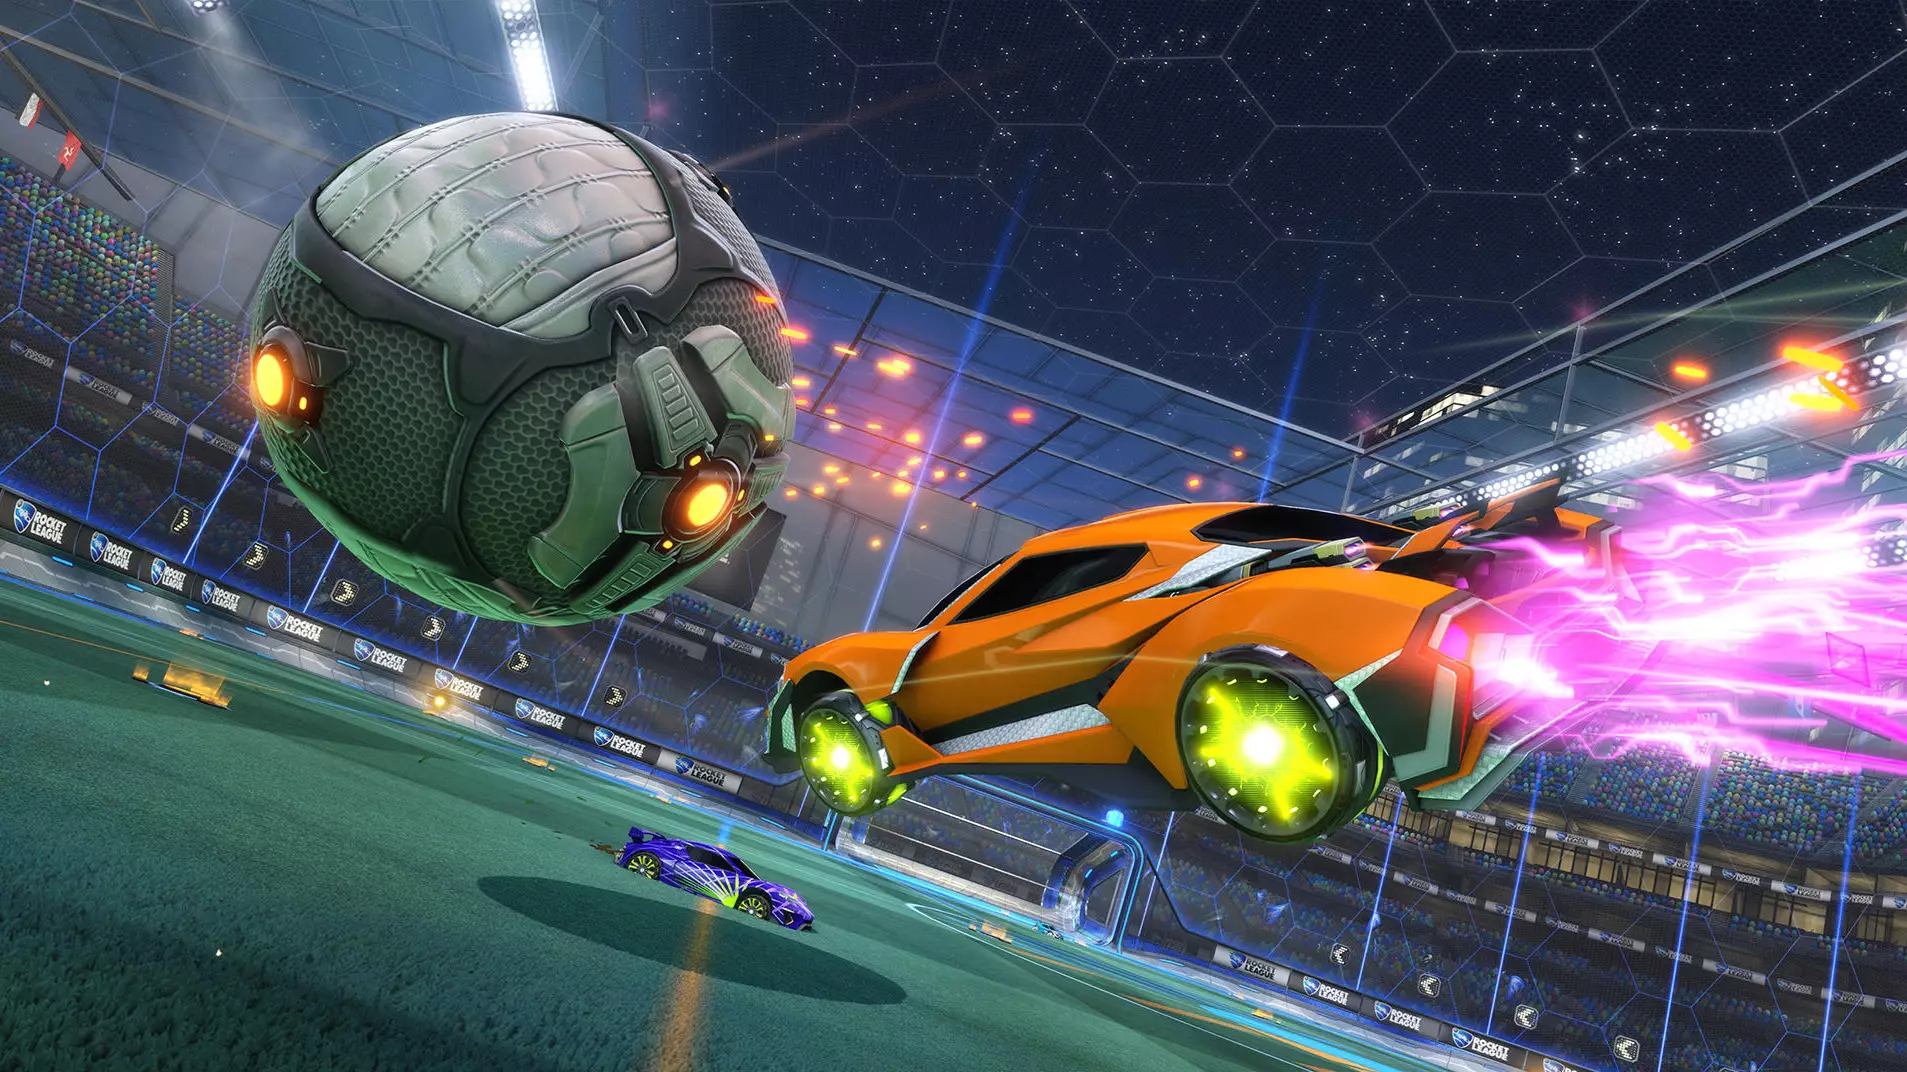 Rocket League developer Psyonix has been bought out by Epic Games